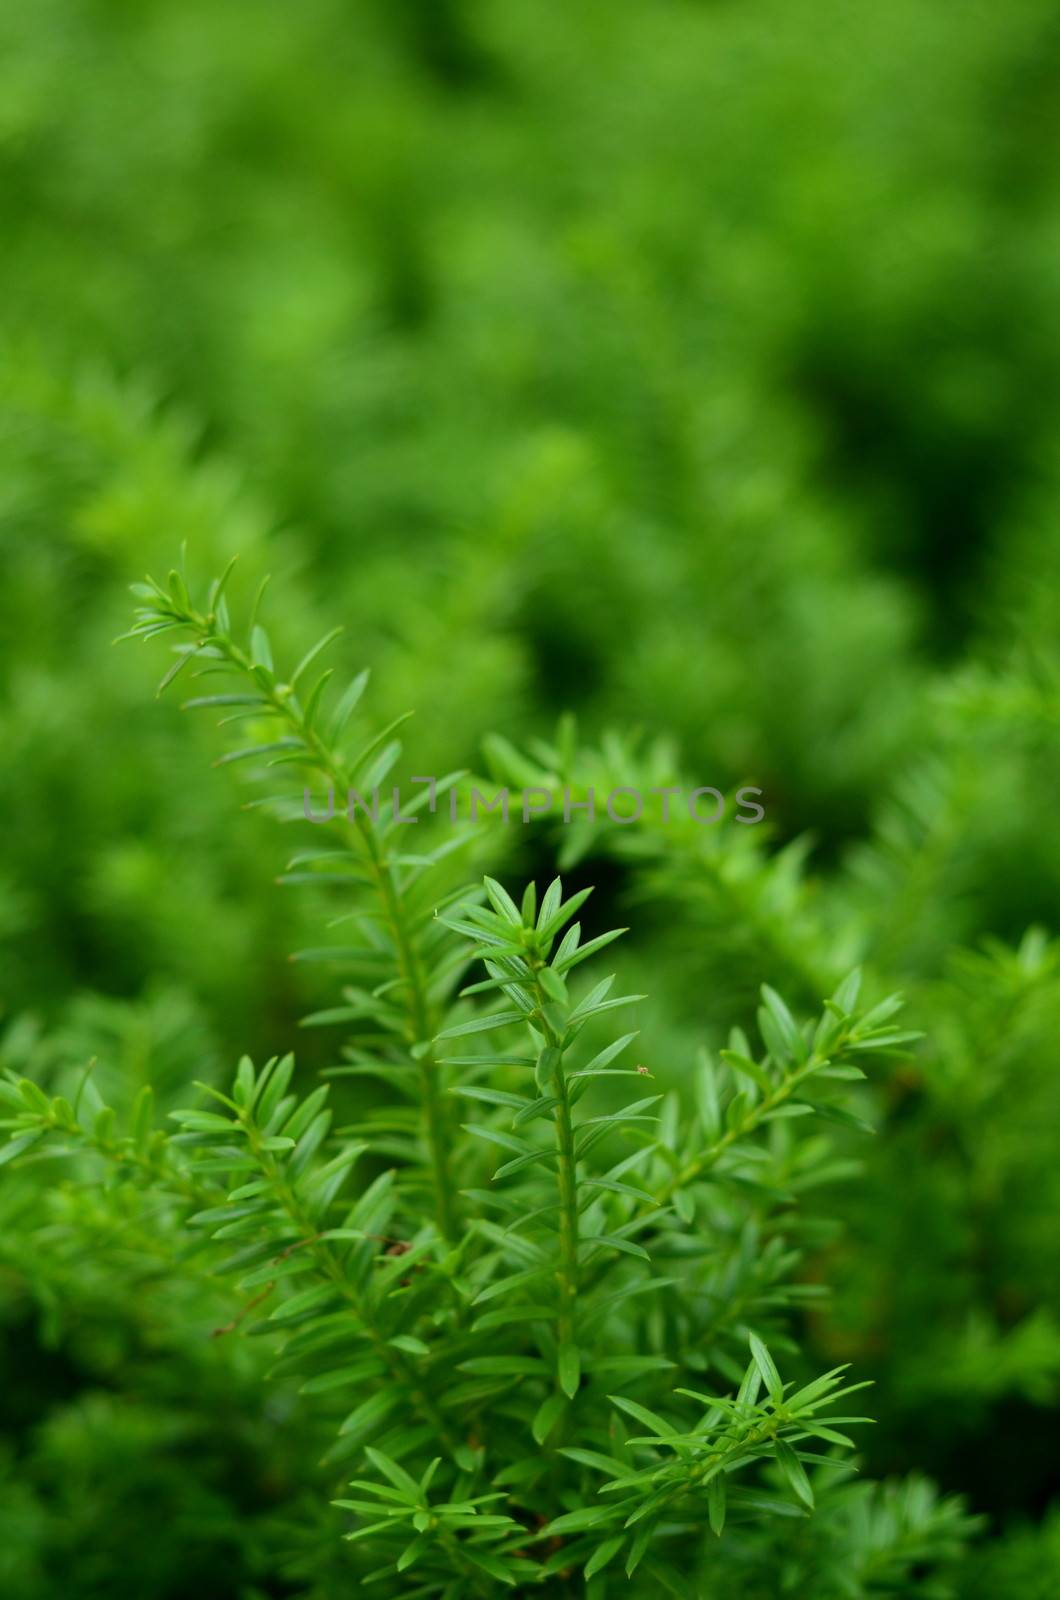 Background Of Some Lush Green Undergrowth With Shallow DoF